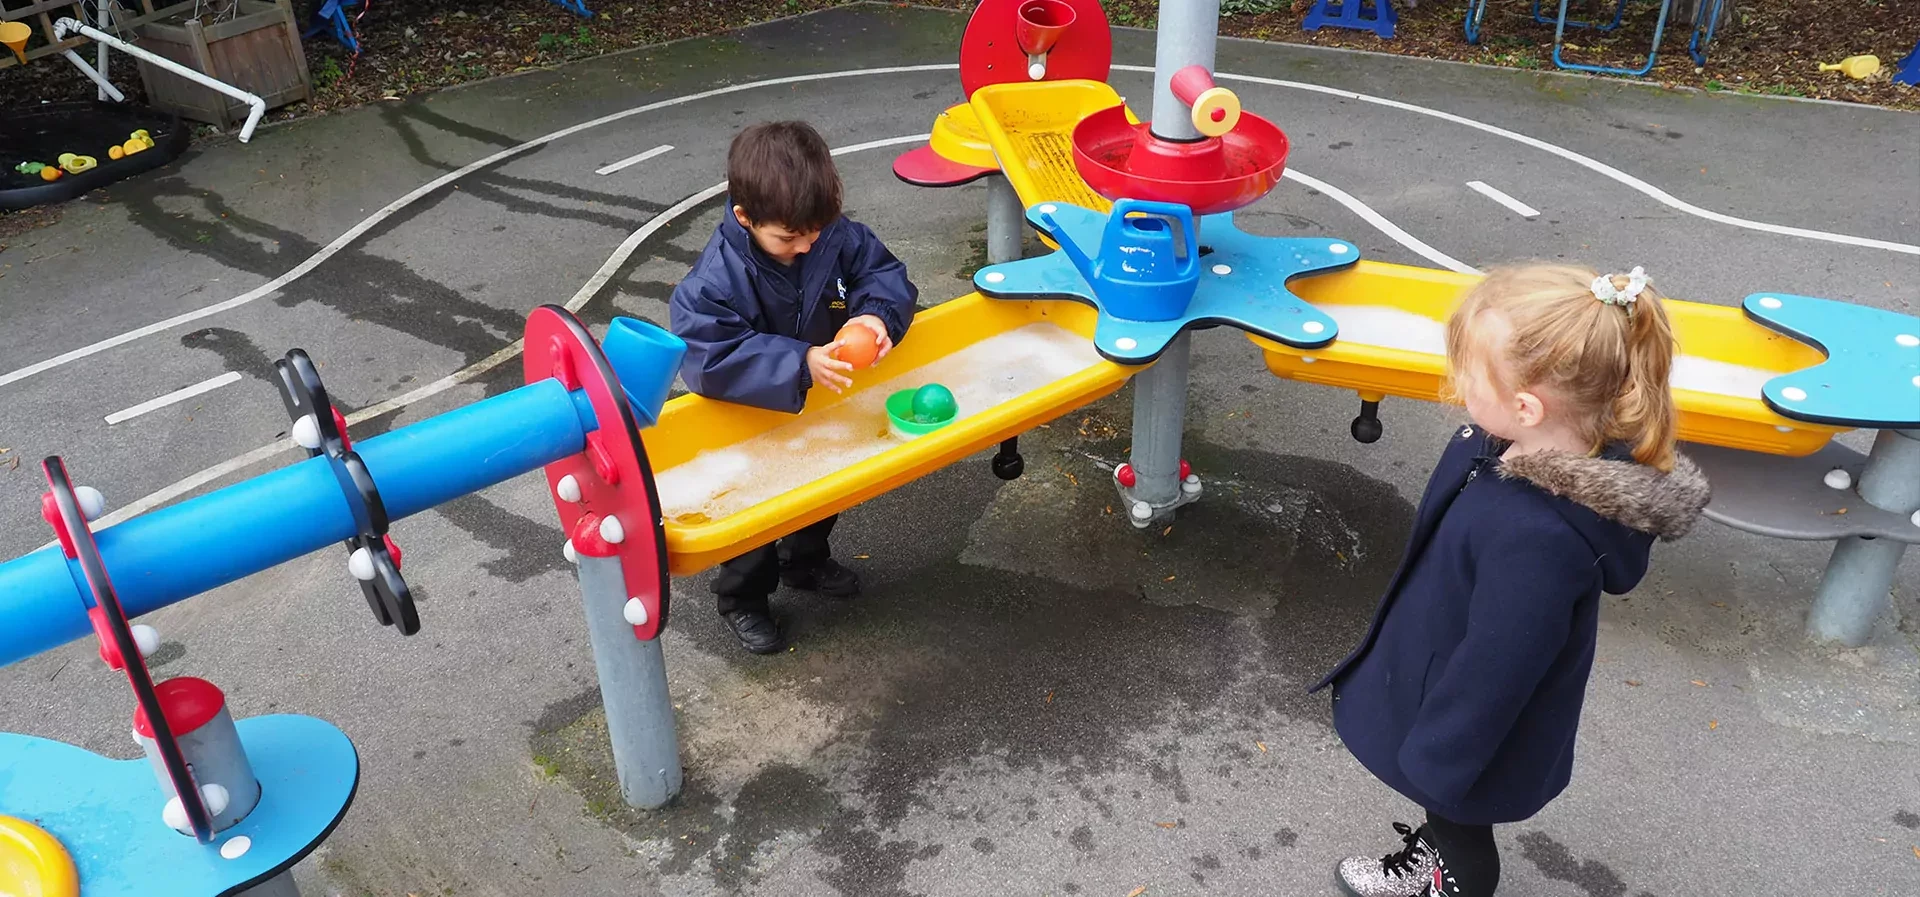 preschoolers playing with sand and water playground equipment in a kindergarten